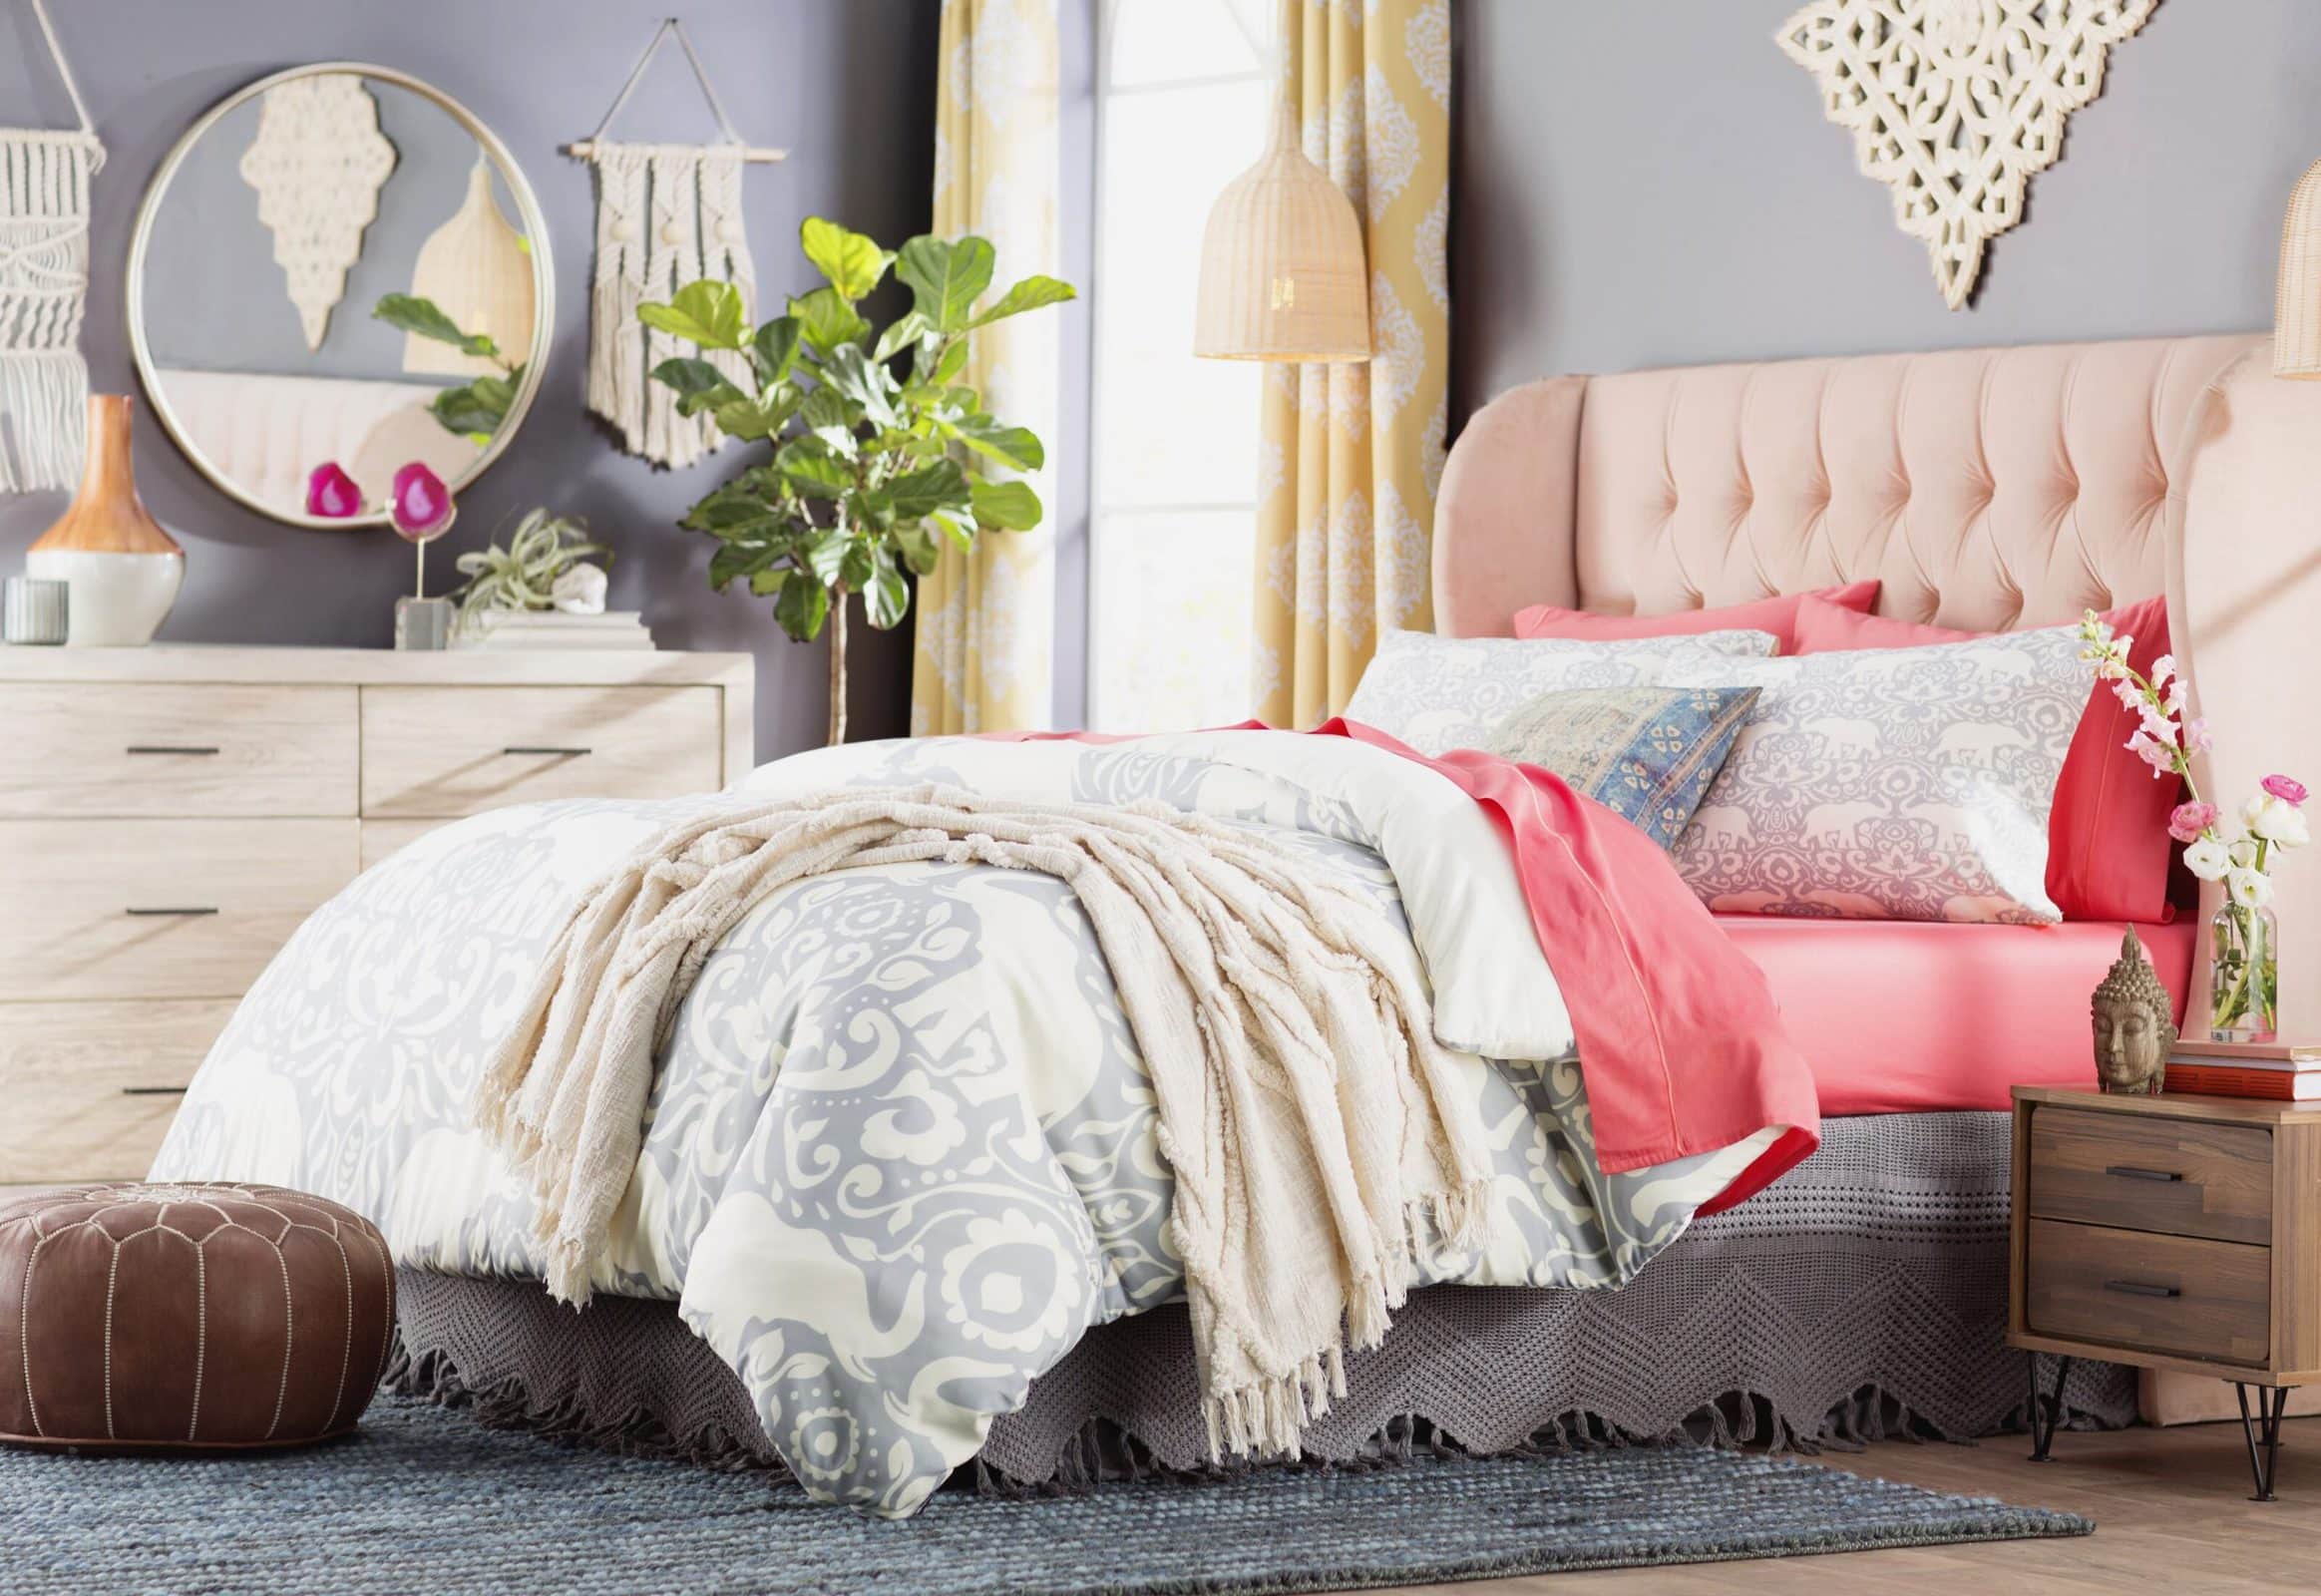 Soften Your Room with a Pink Boho Headboard